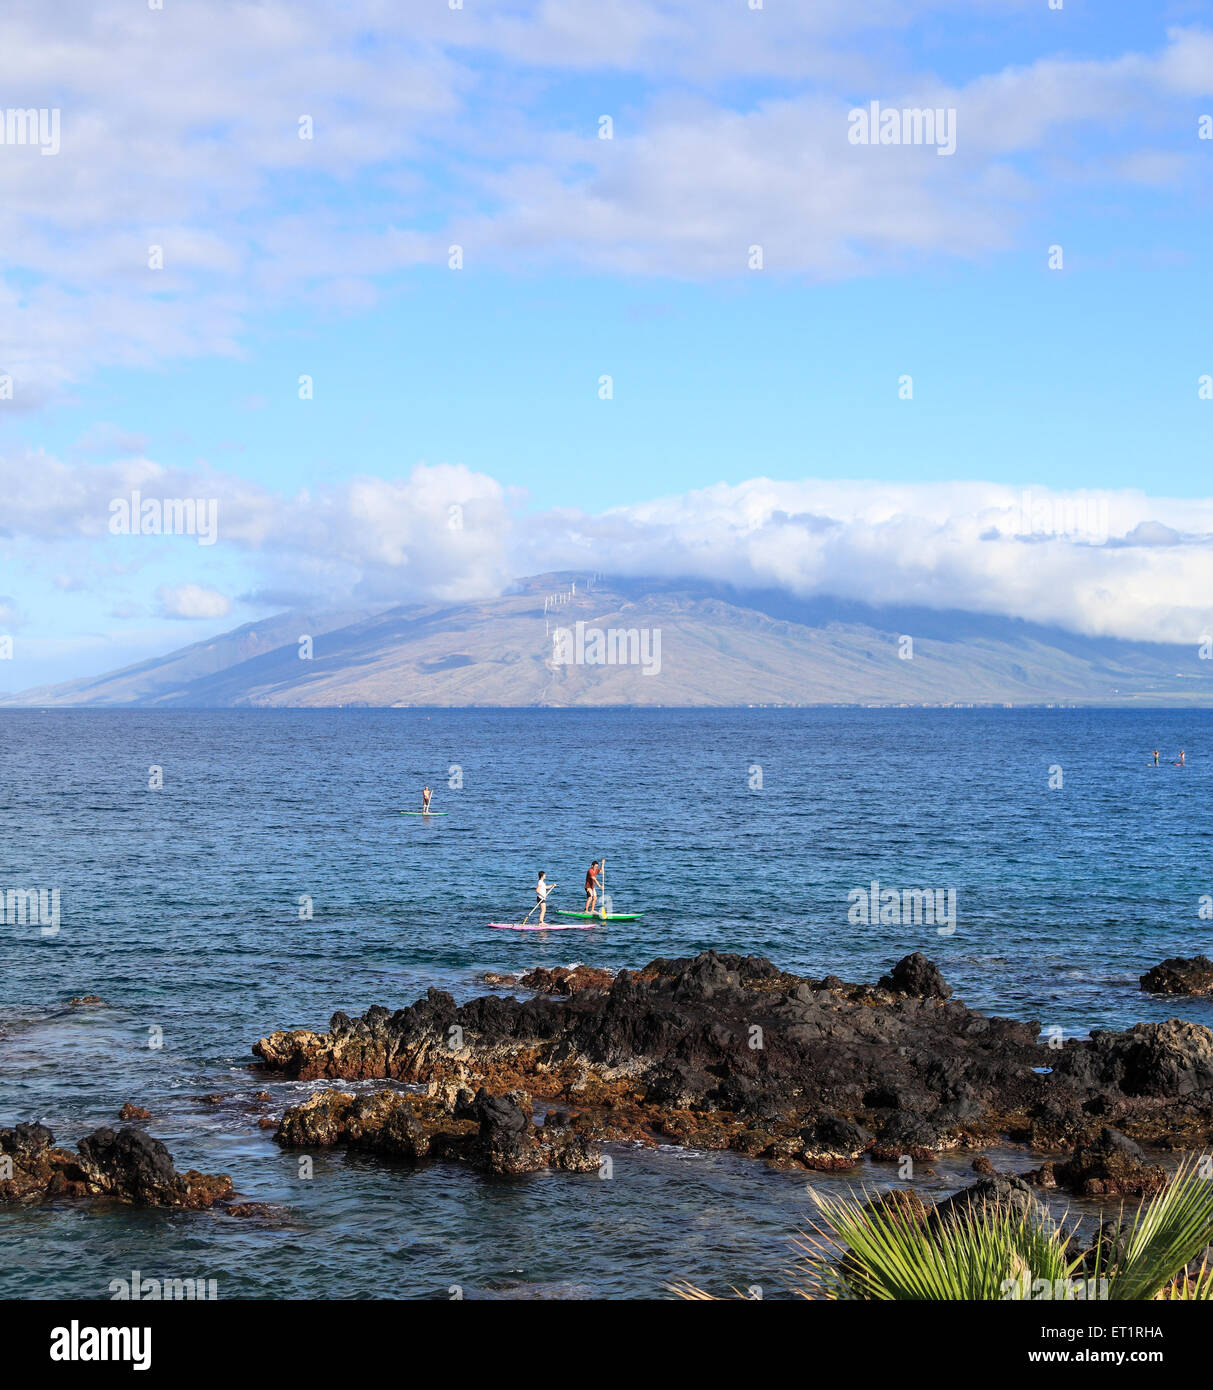 Stand up paddle boarders off Wailea, Maui, as seen from the beach walk Stock Photo